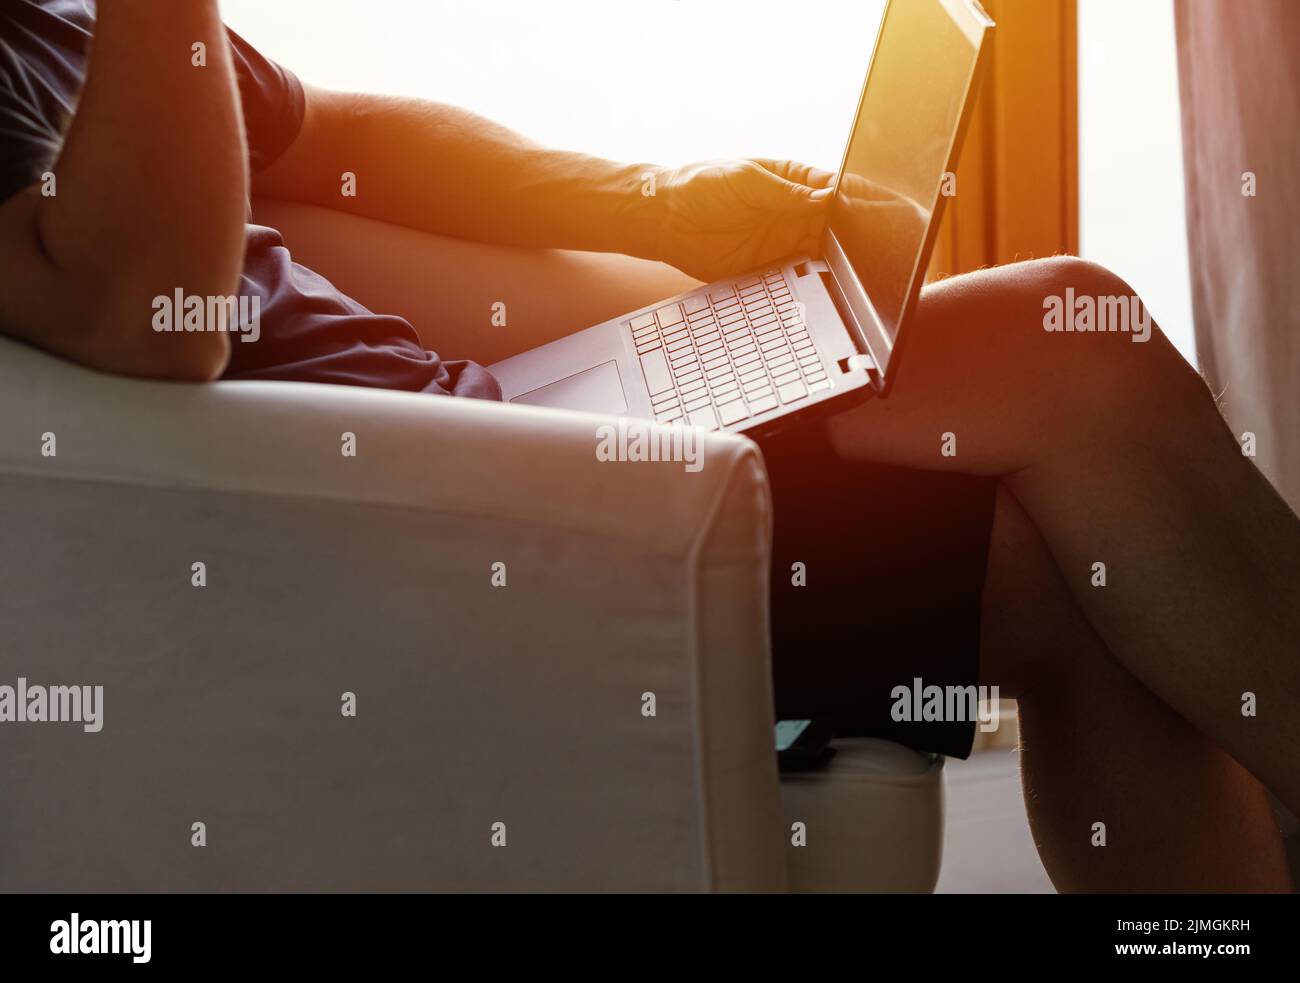 Working from home on the laptop. Wearing casual comfort outfit in home office. Stock Photo